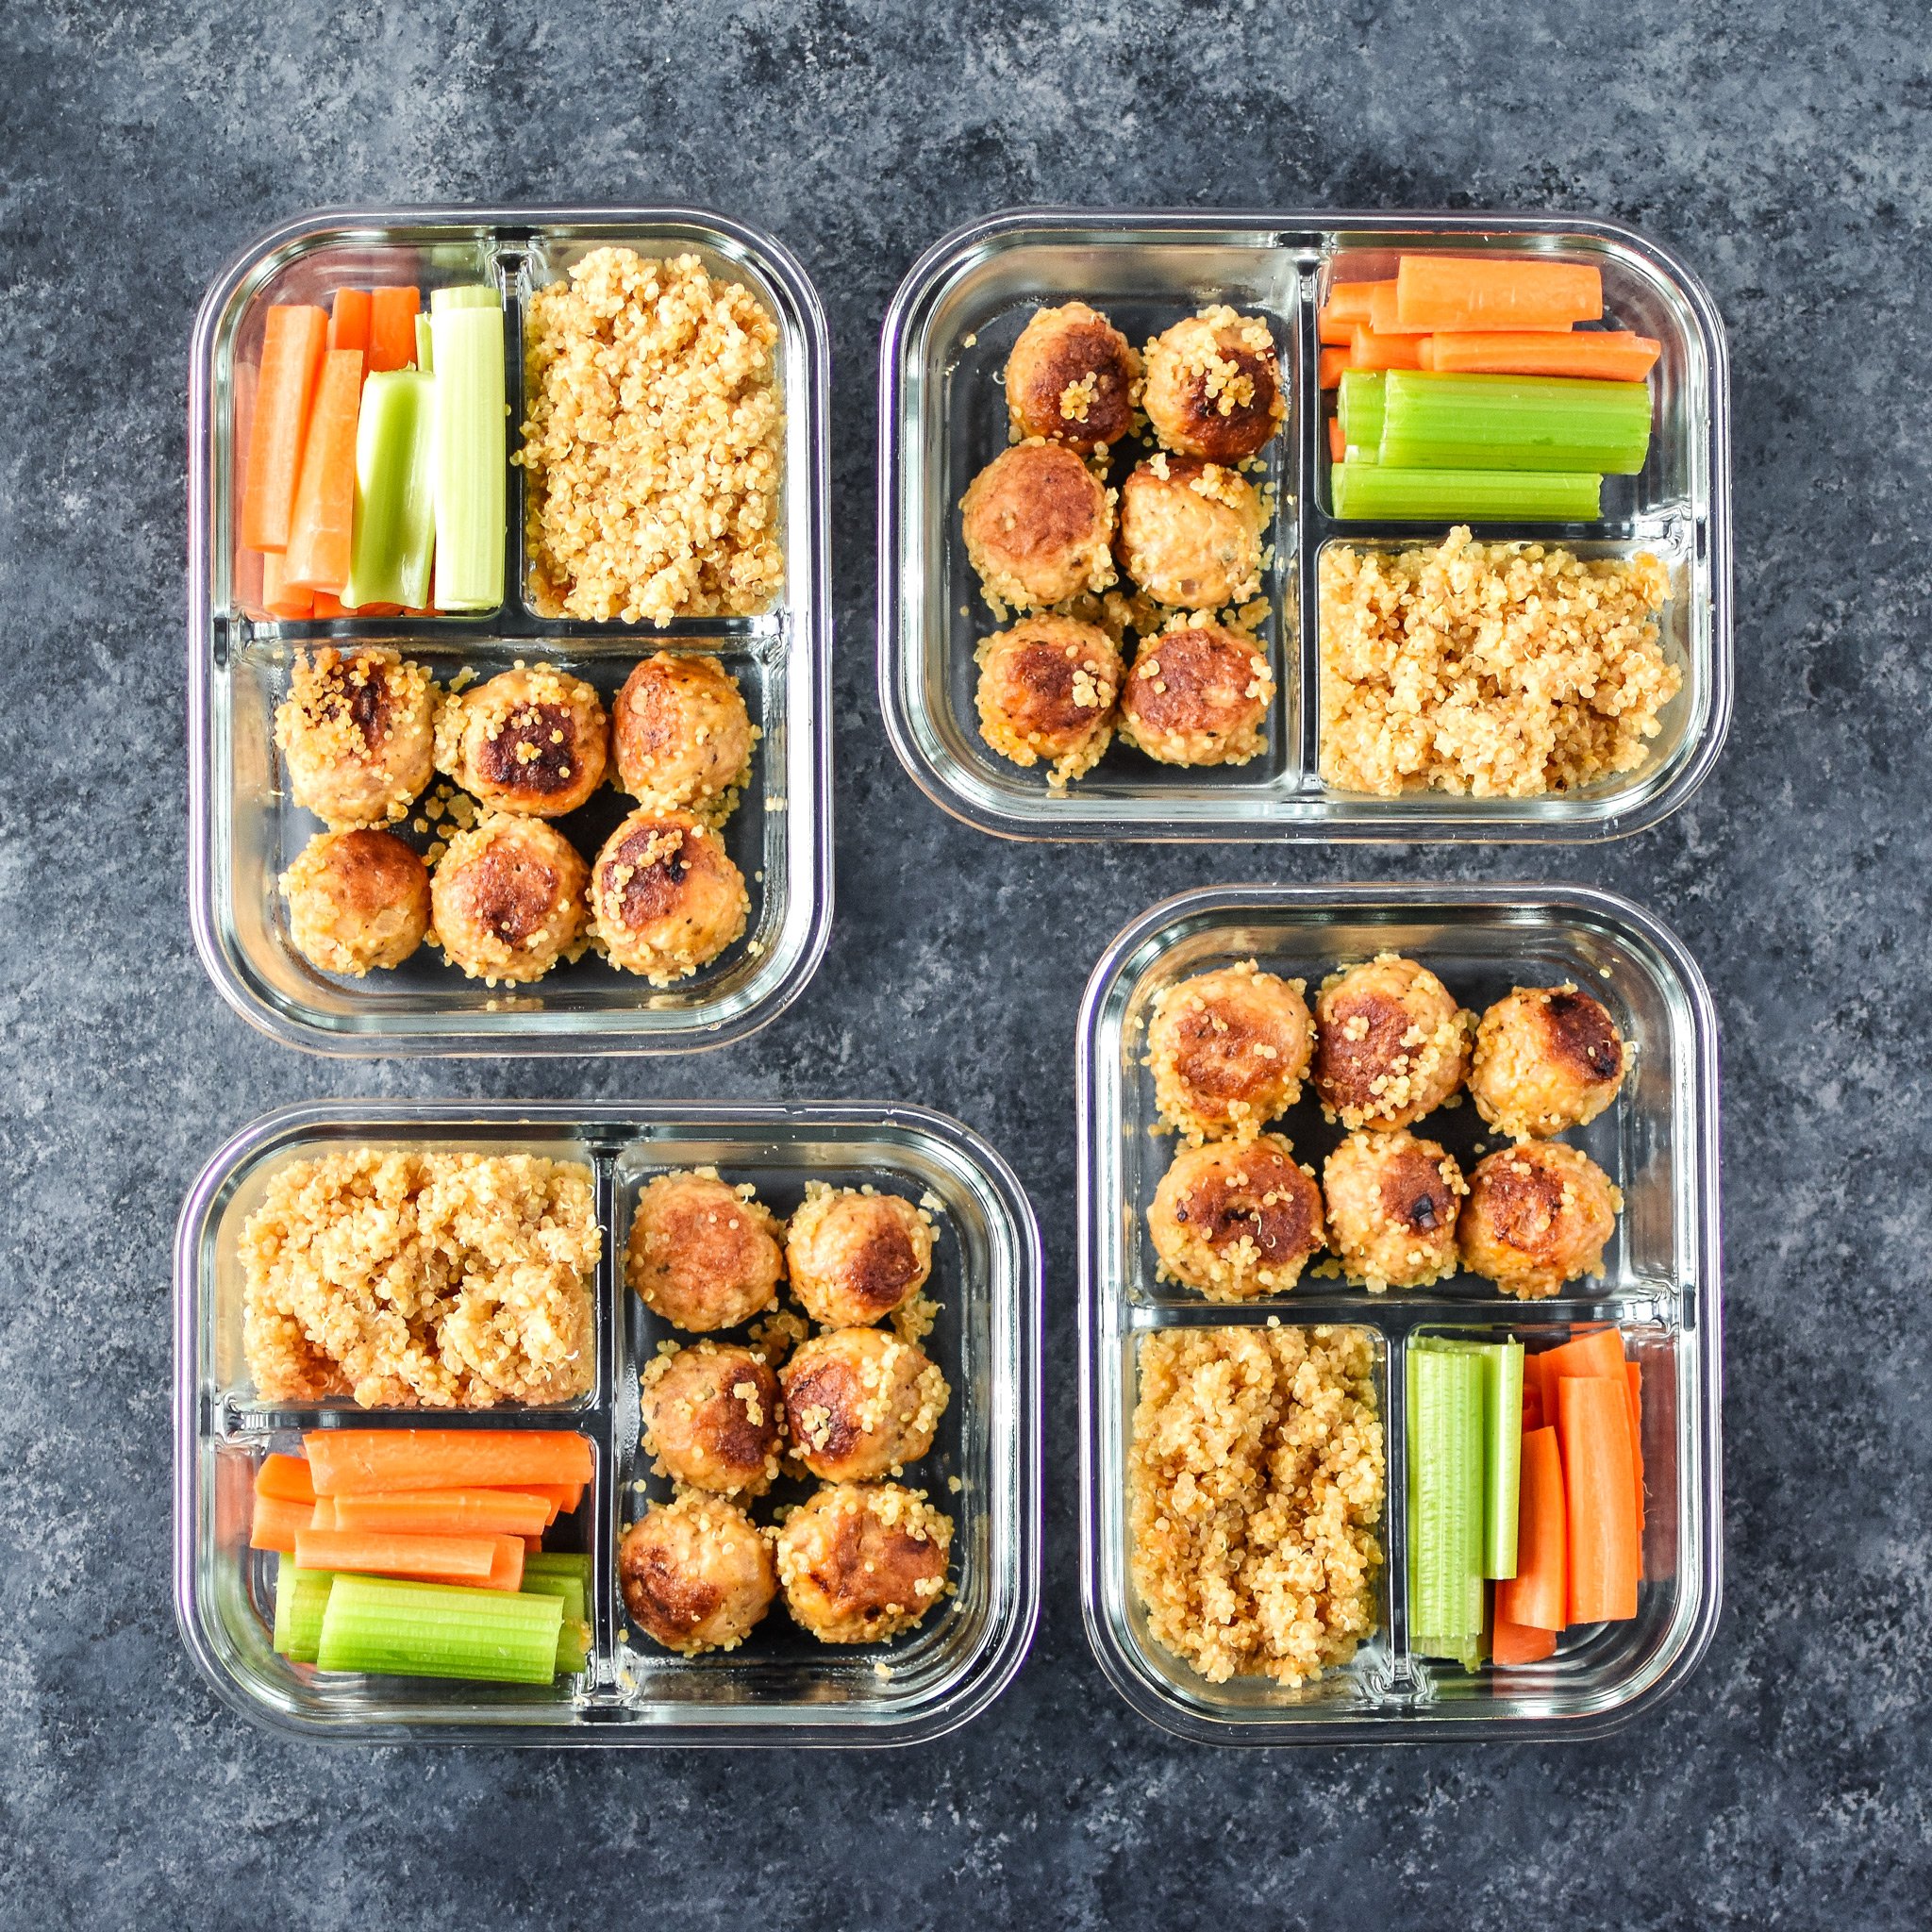 Let’s Meal Prep for the Weekend! 